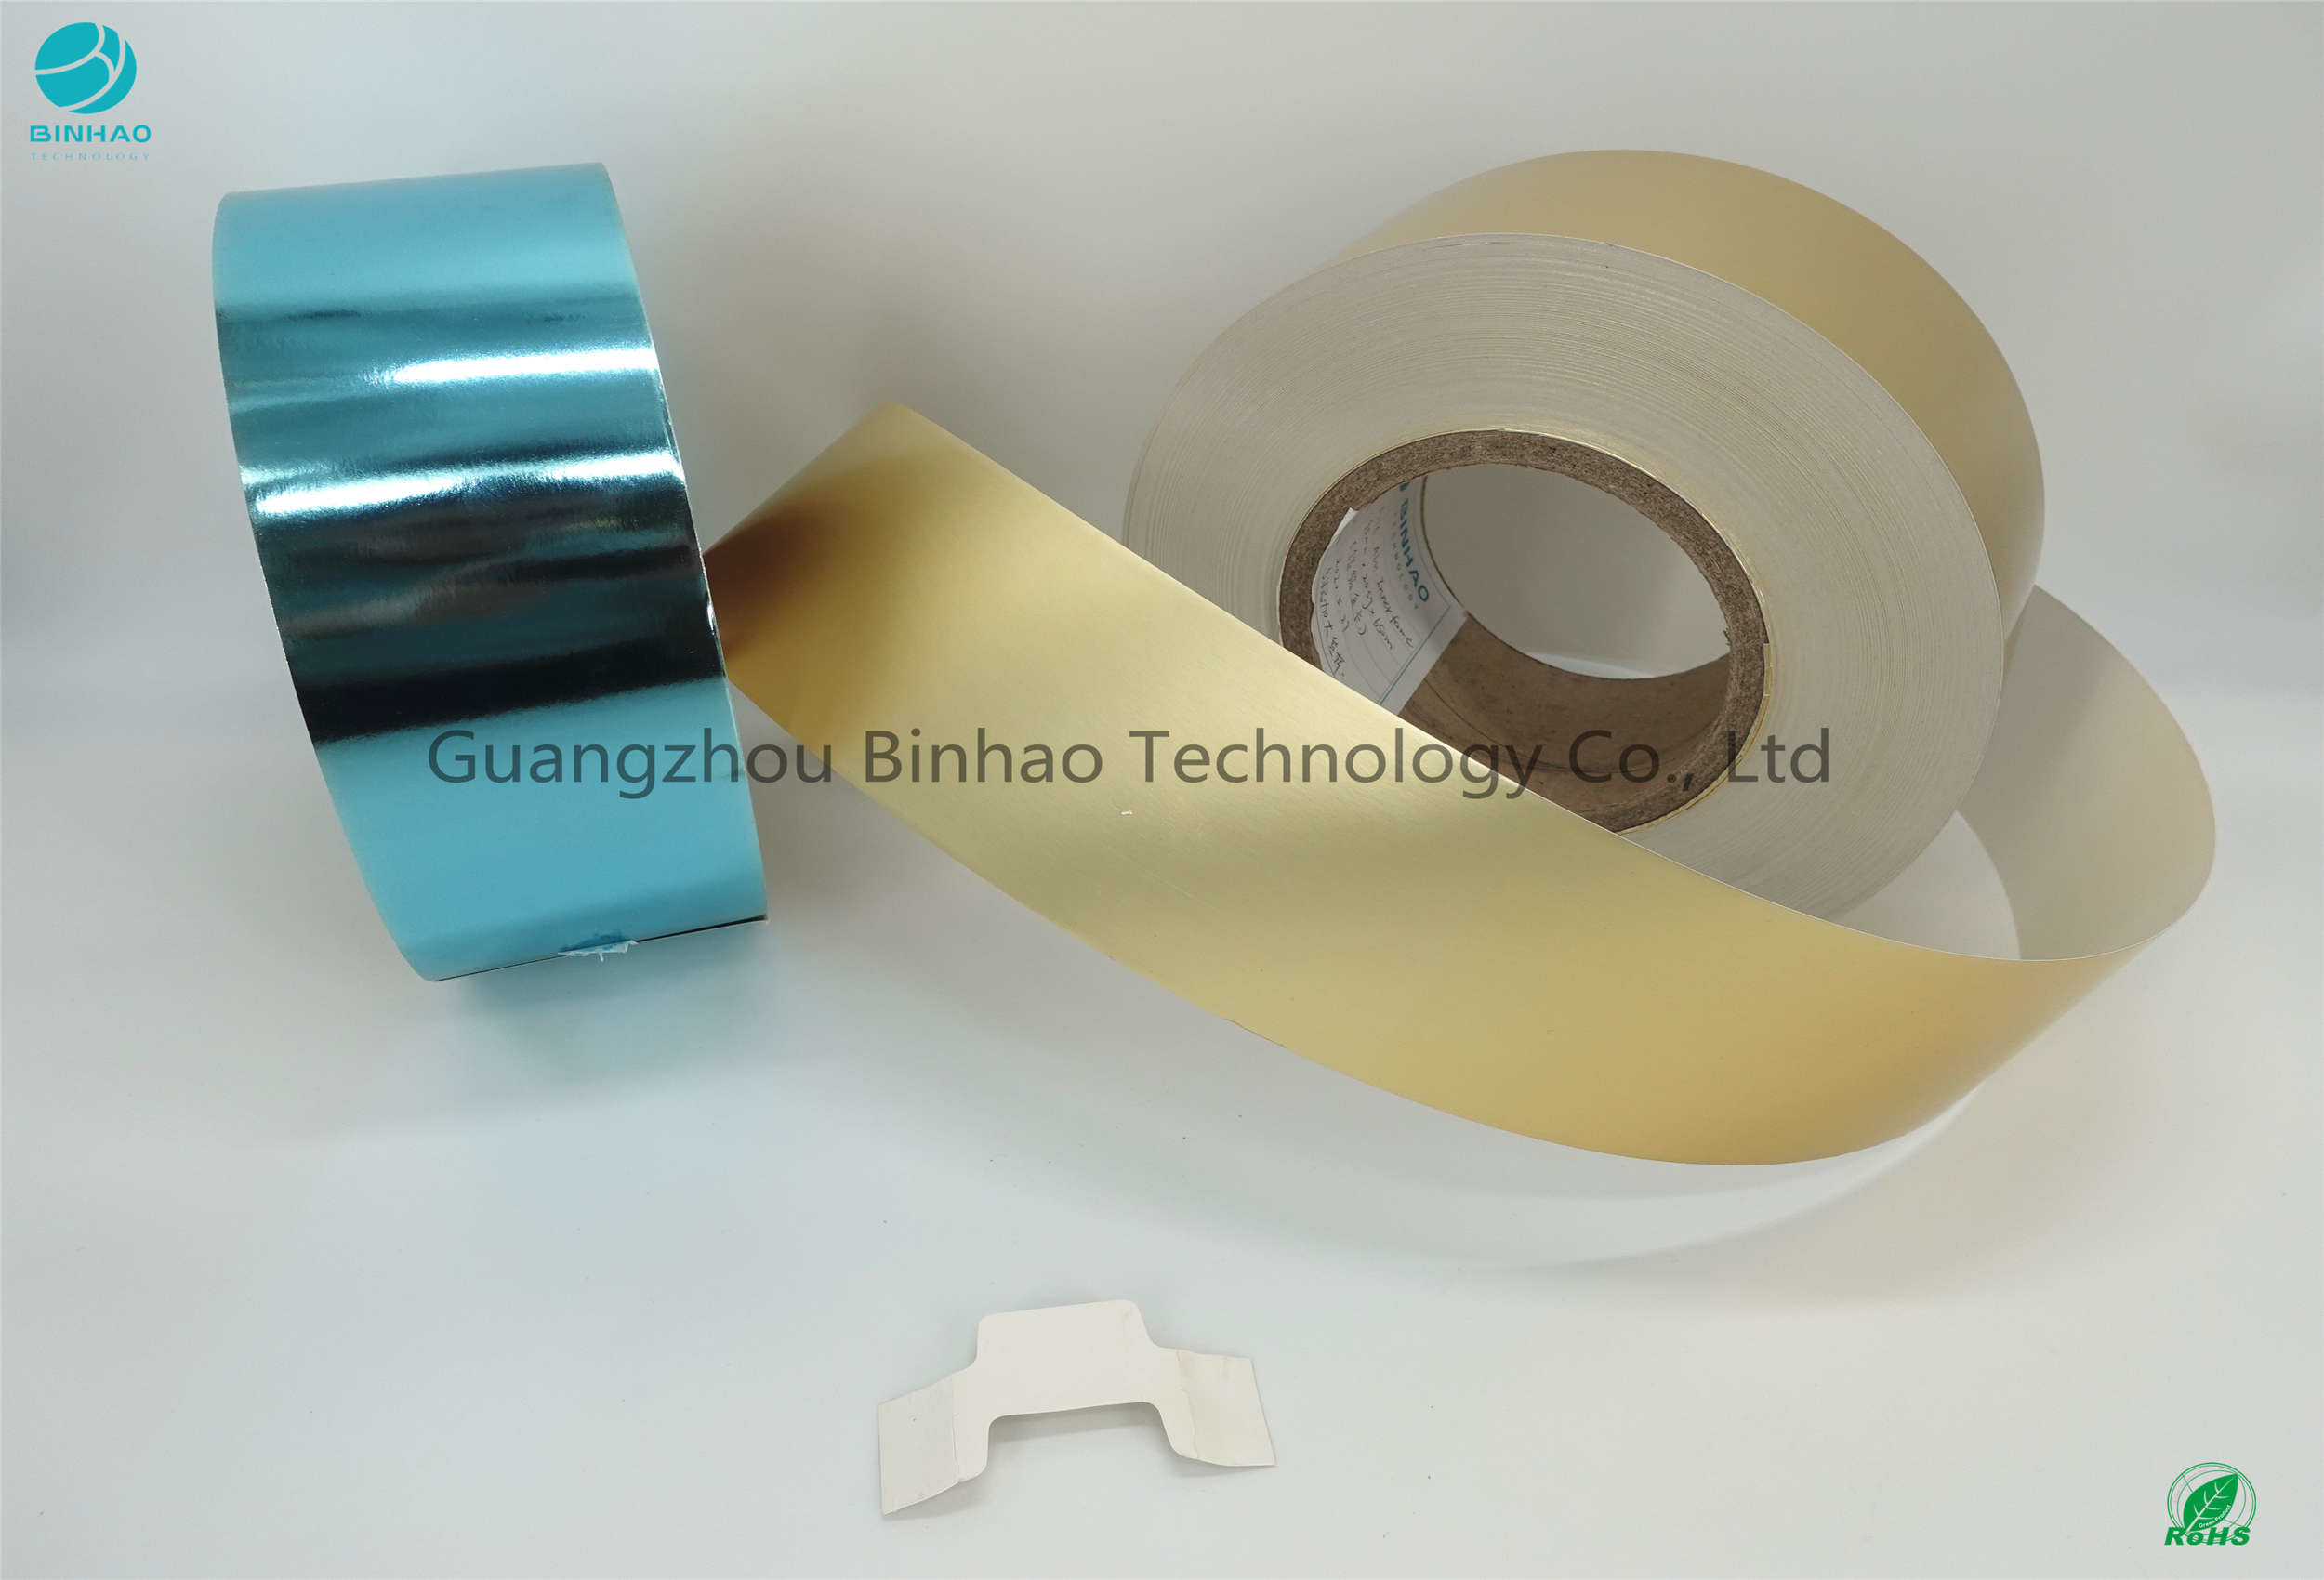 Quadro interno 120mm 35% Haze Tobacco Package Materials For HLP2